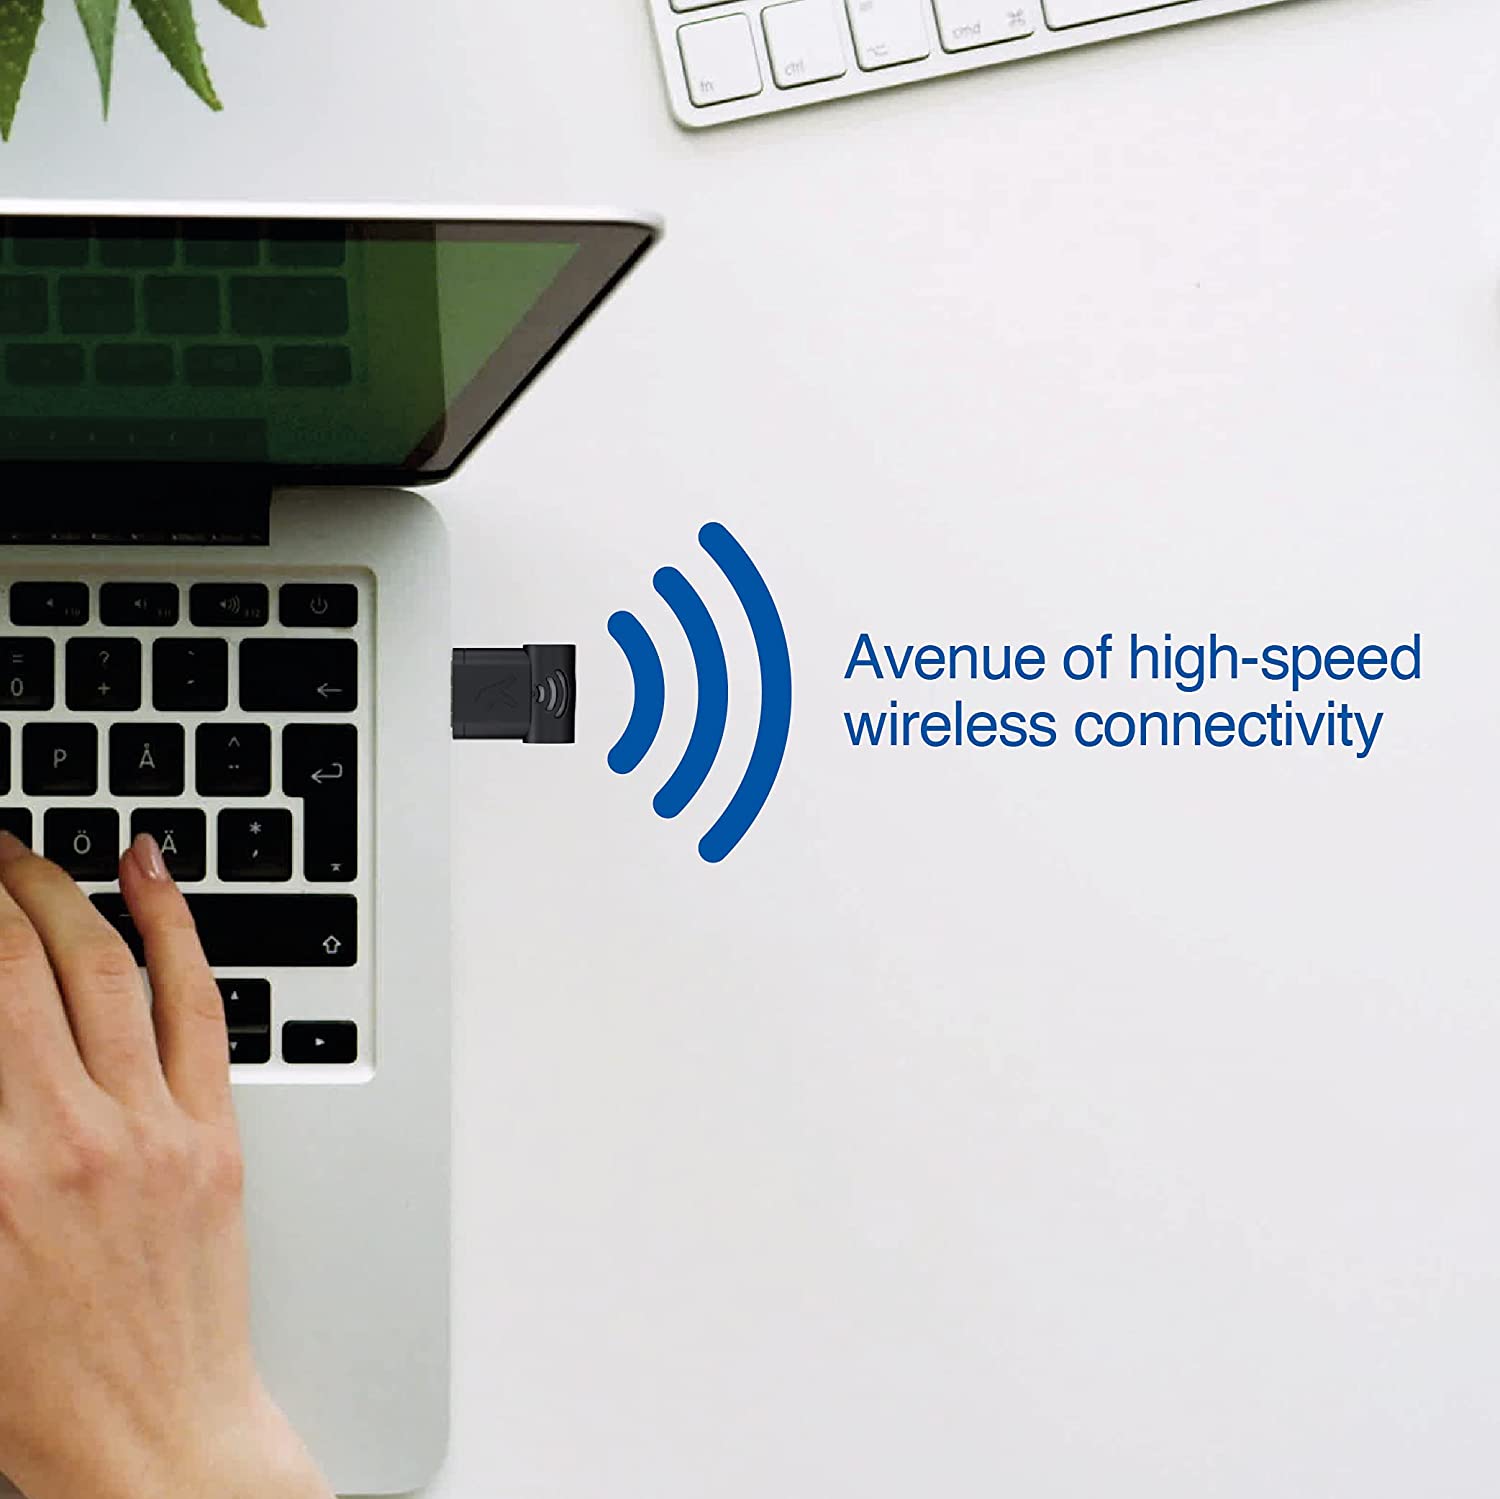 FINGERS FWF300 Wi-Fi USB Adapter (Nano-Sized High Speed and Wi-Fi Compatible with Windows, Linux, and Mac Speed up to 300 Mbps)-wifi Adapter-dealsplant